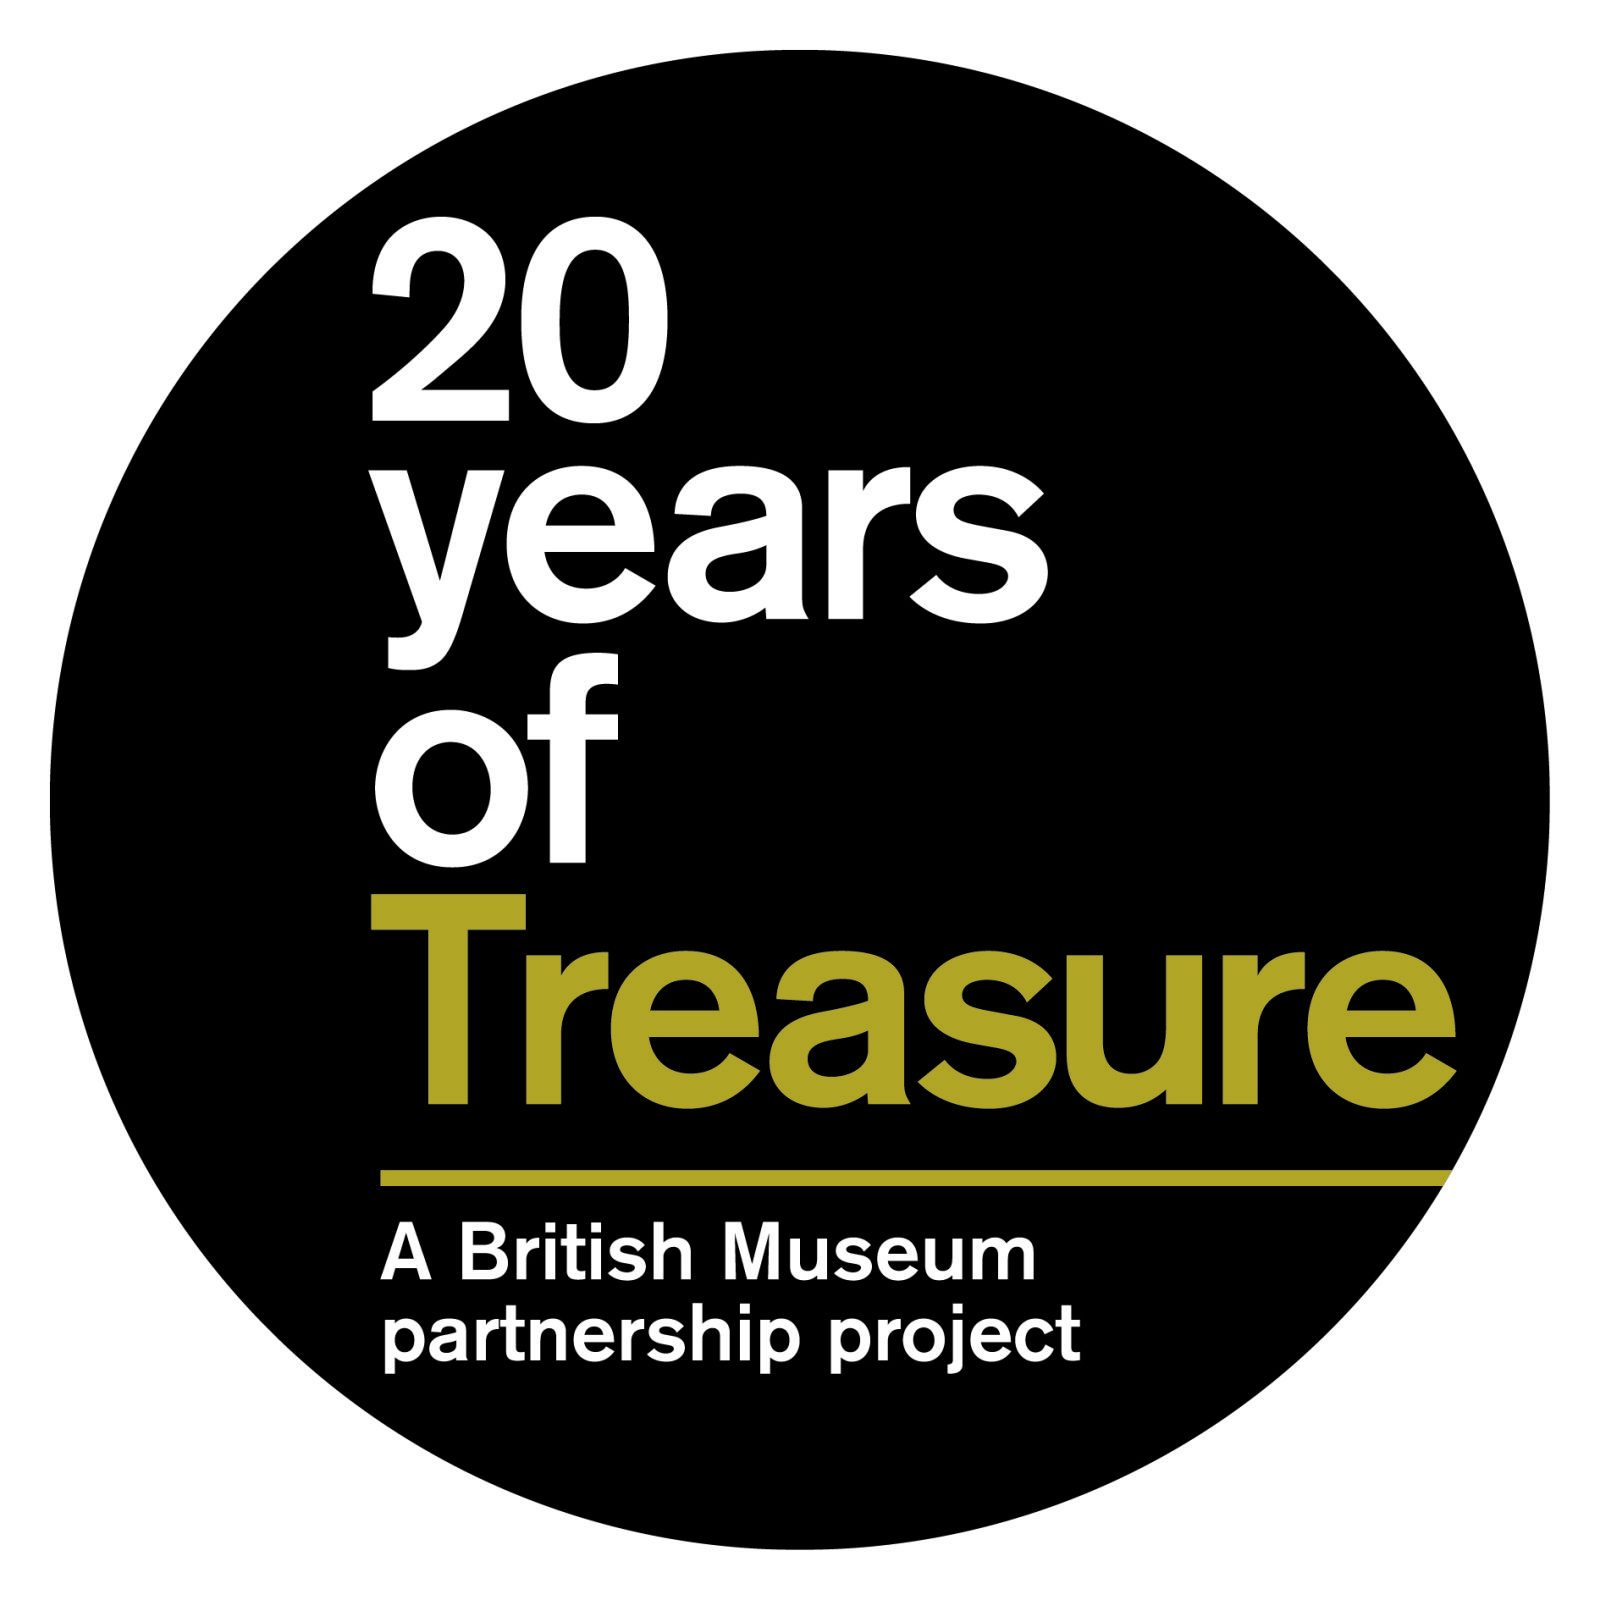 This is the logo for the '20 years of Treasure' competition, run by the British Museum and the Daily Telegraph.